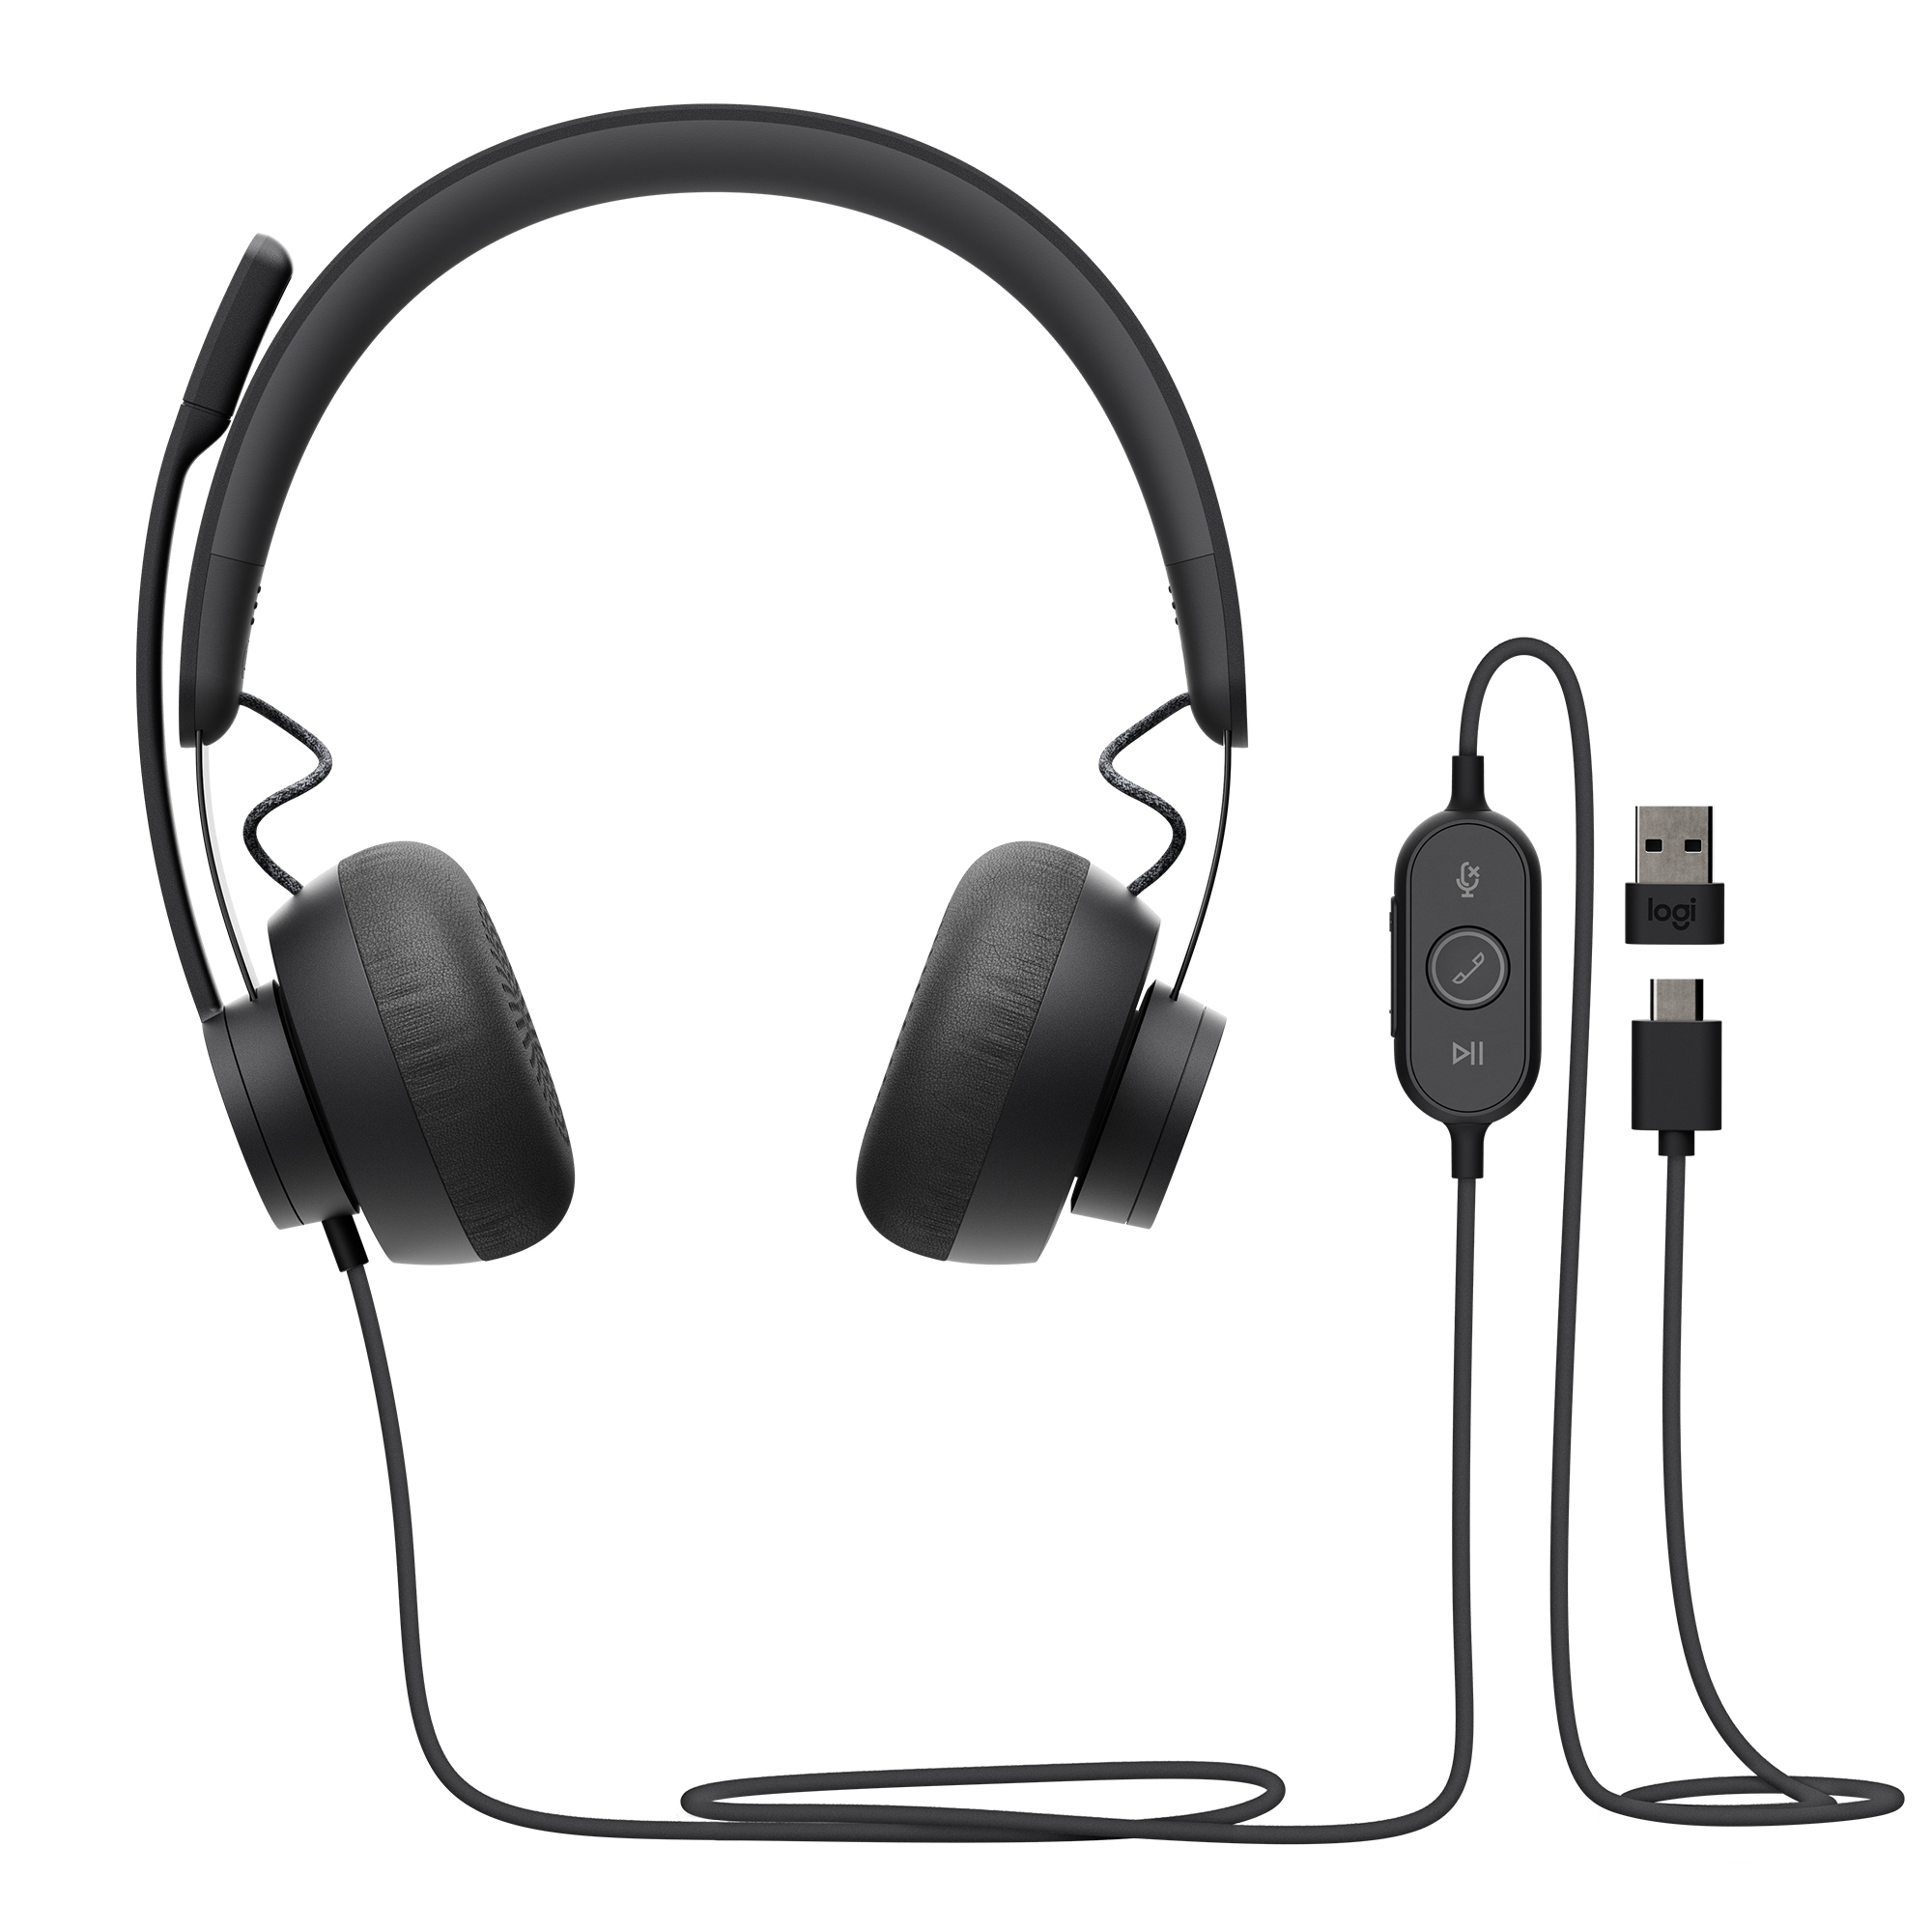 Logitech Zone 750 Headset Wired Head-band Office/Call center USB Type-C Graphite - 981-001104